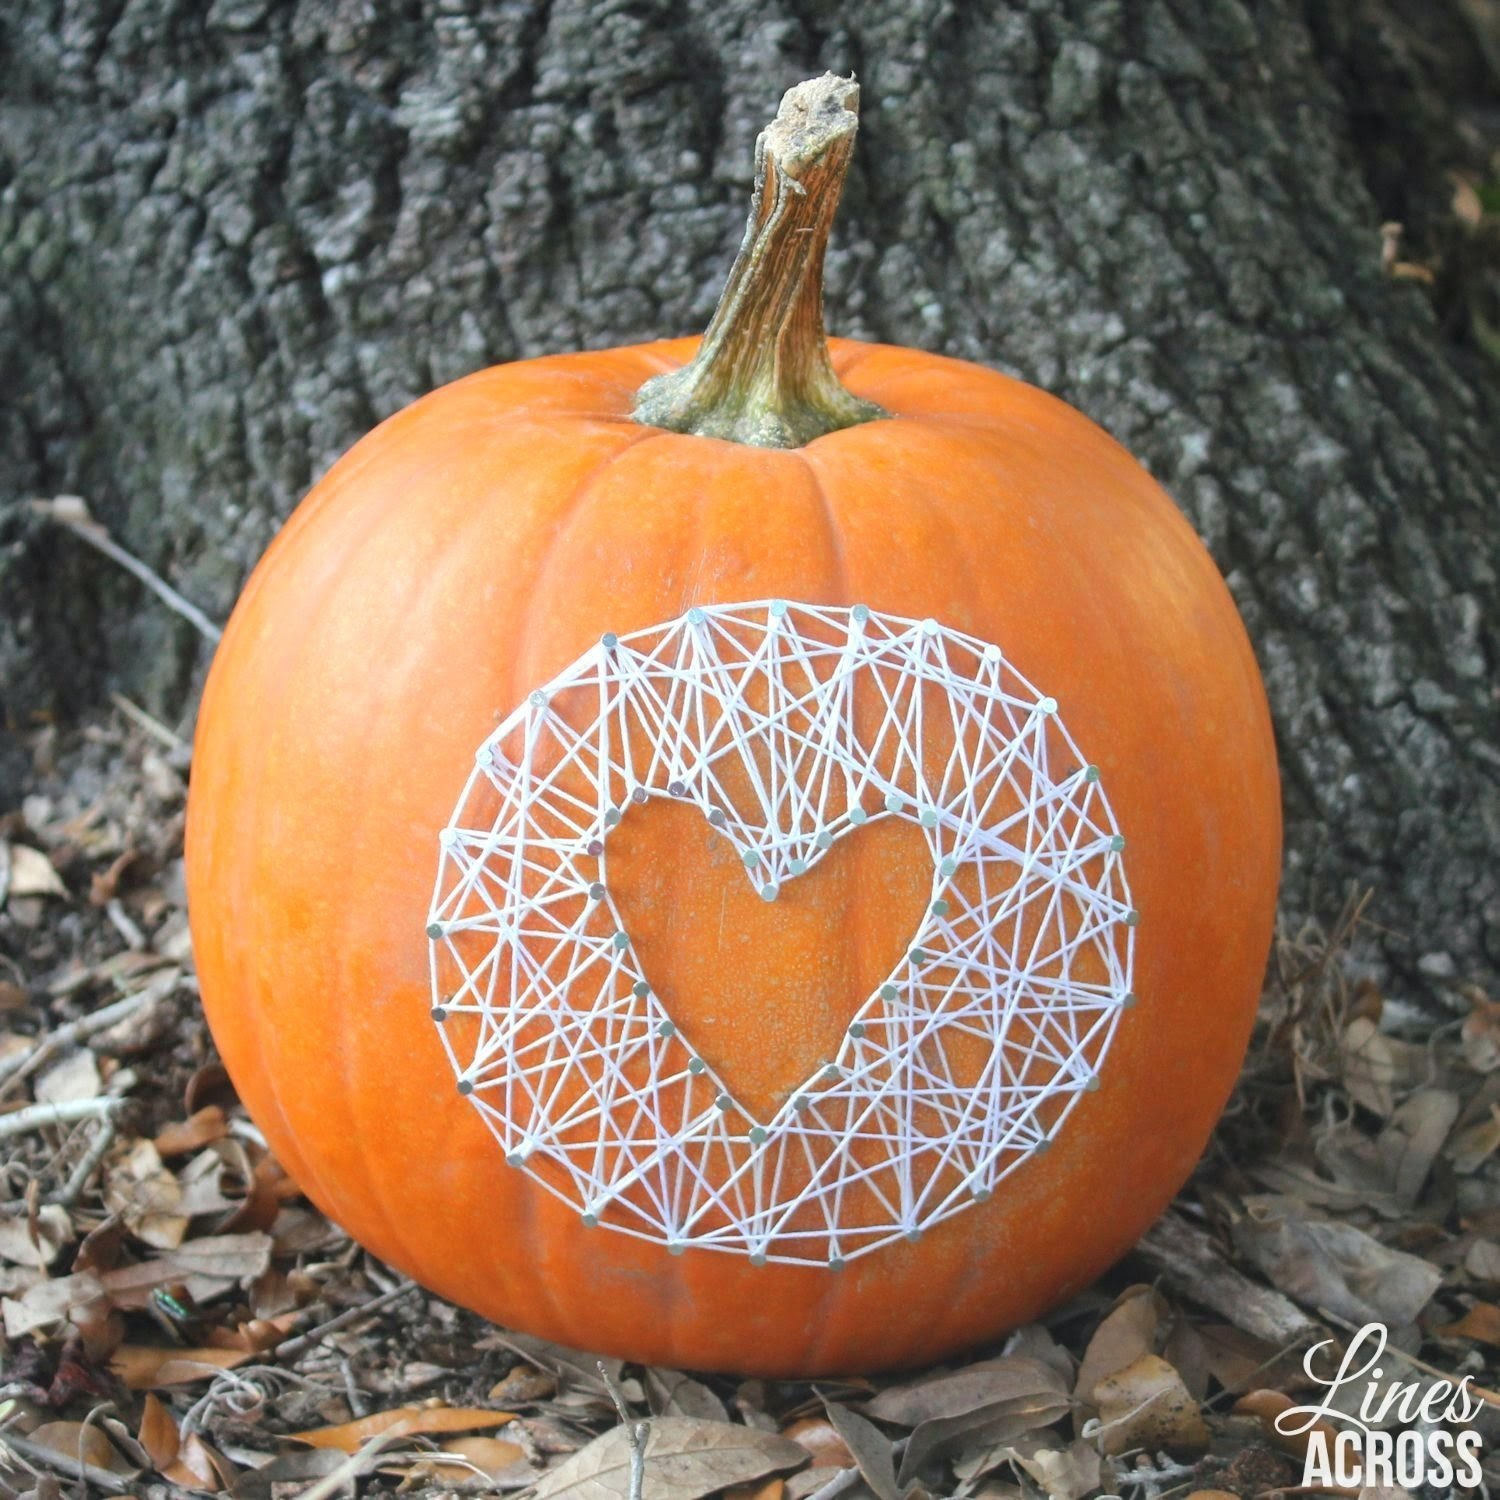 10 Most Recommended Non Carving Pumpkin Decorating Ideas 60 pumpkin designs we love for 2017 pumpkin decorating ideas 2022